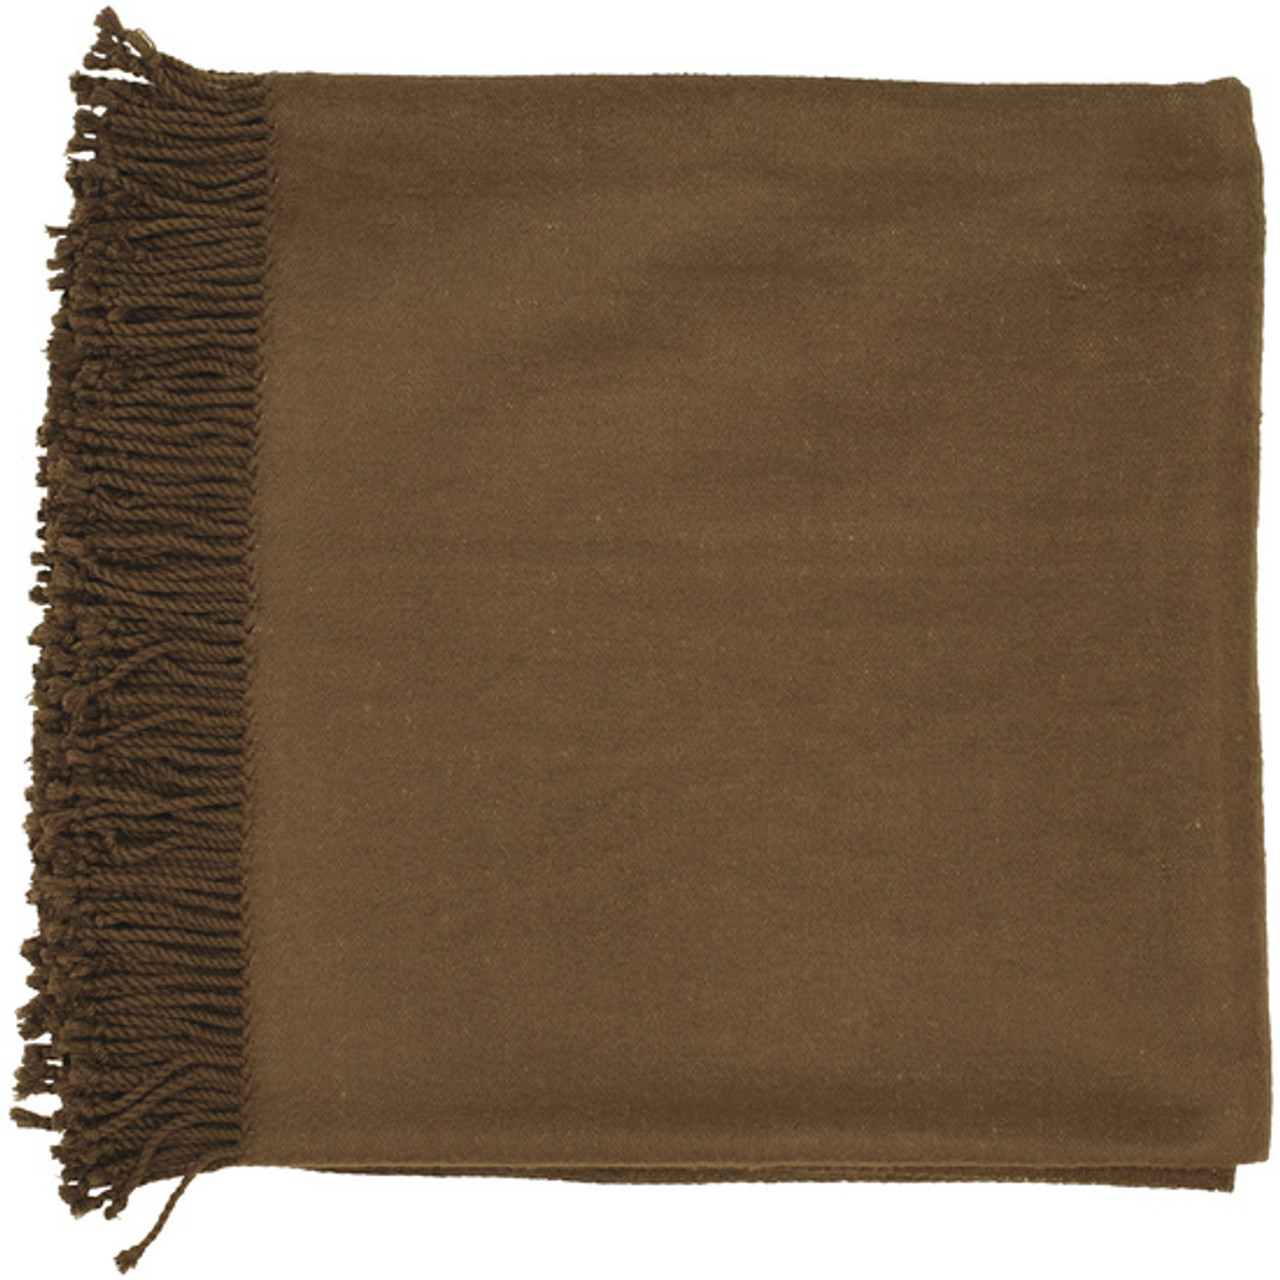 50 X 67 Right At Home Cozy Brown Throw Blanket Christmas Central